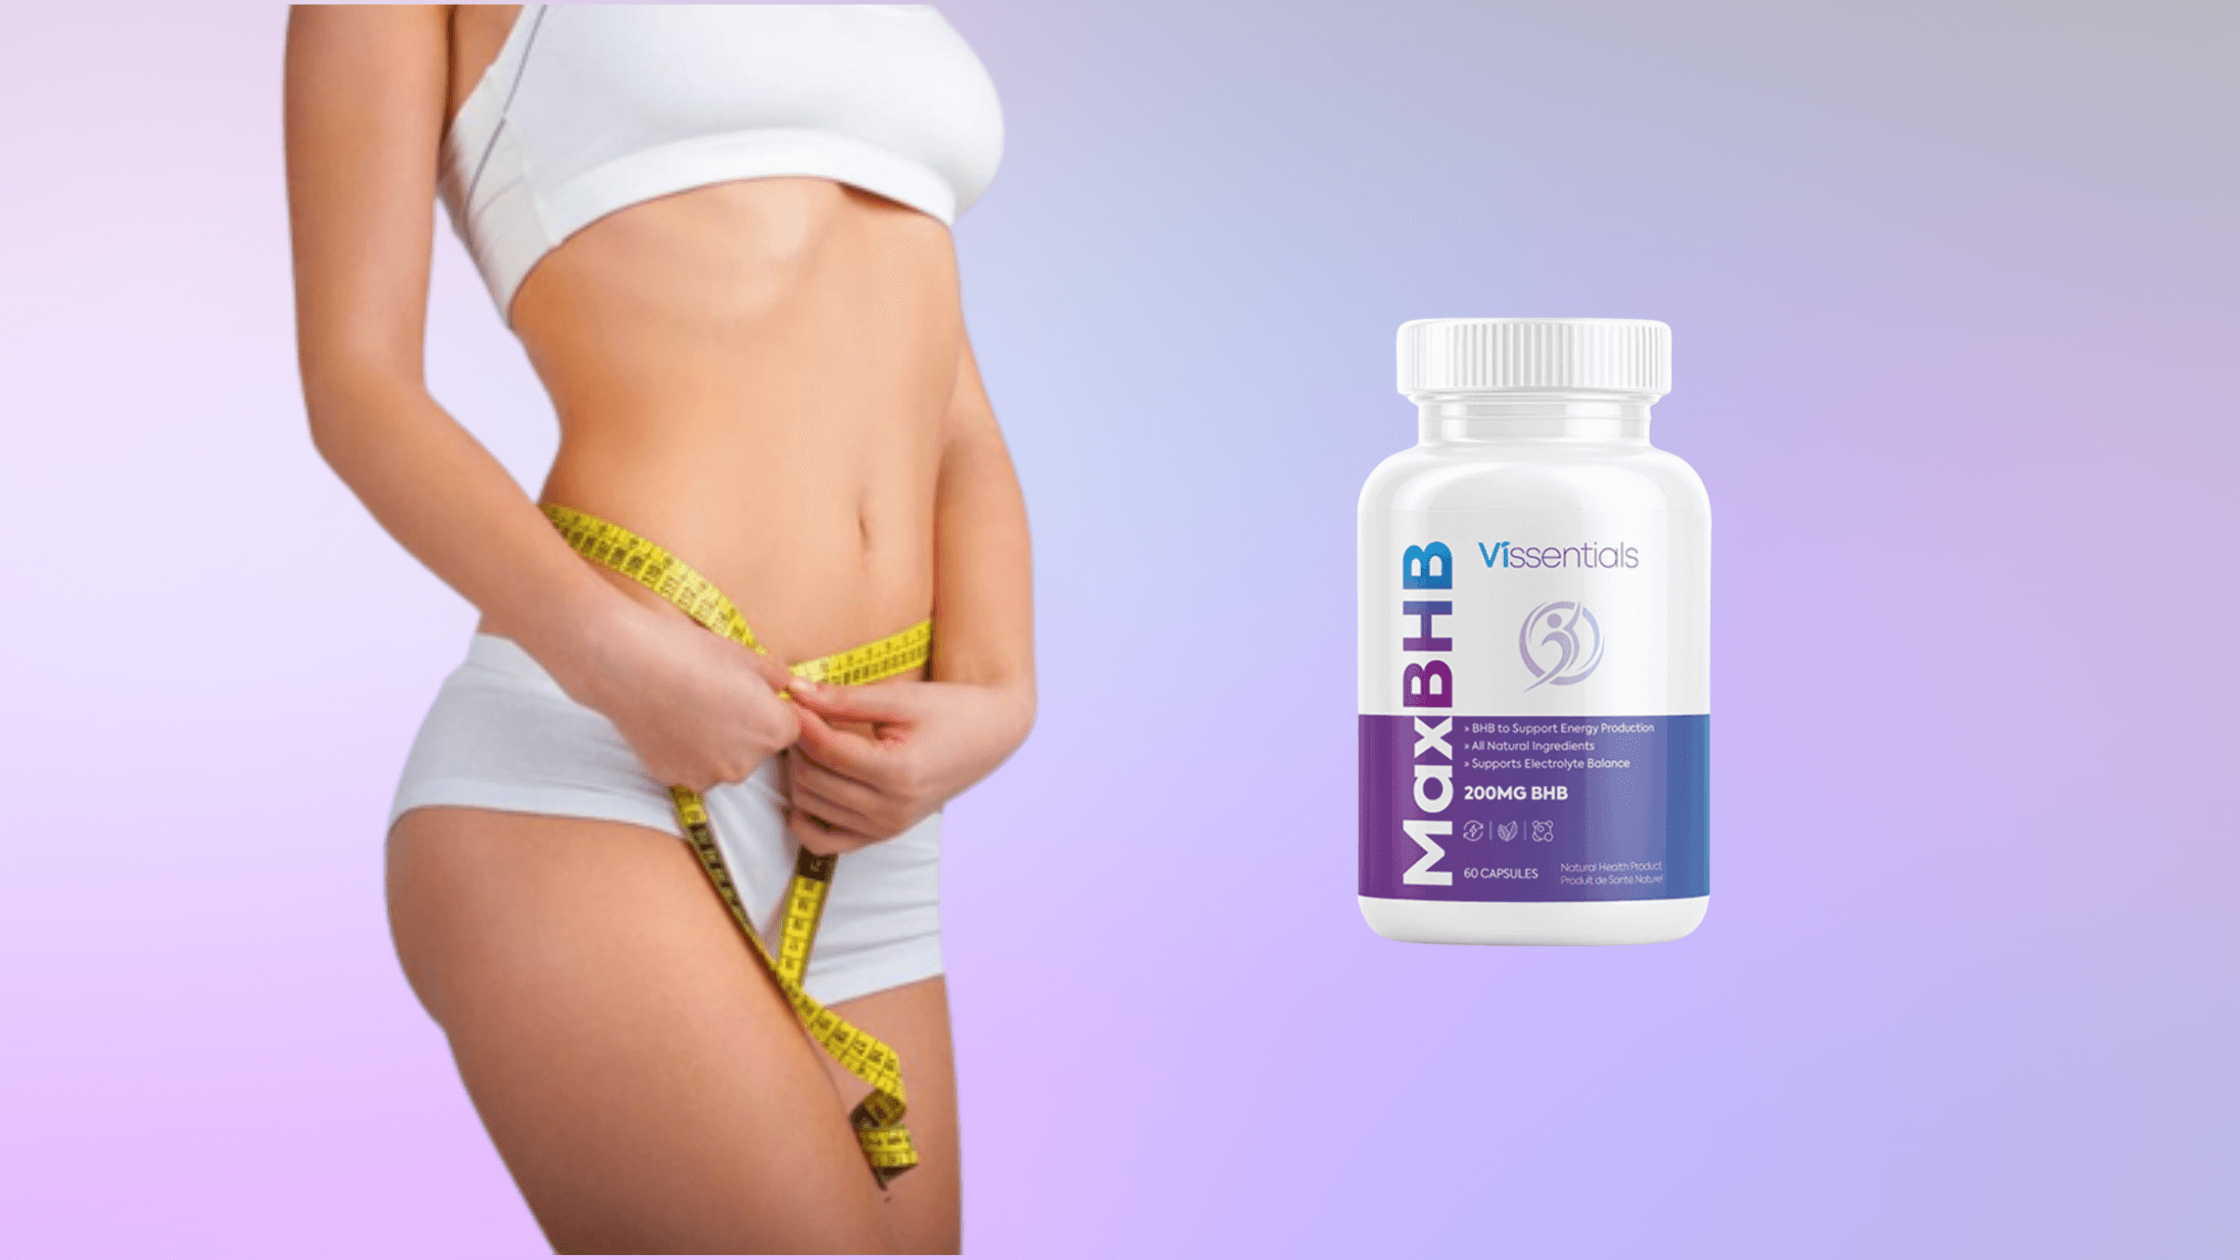 Vissentials Max BHB - Weight Loss Reviews Benefits Price & Results?